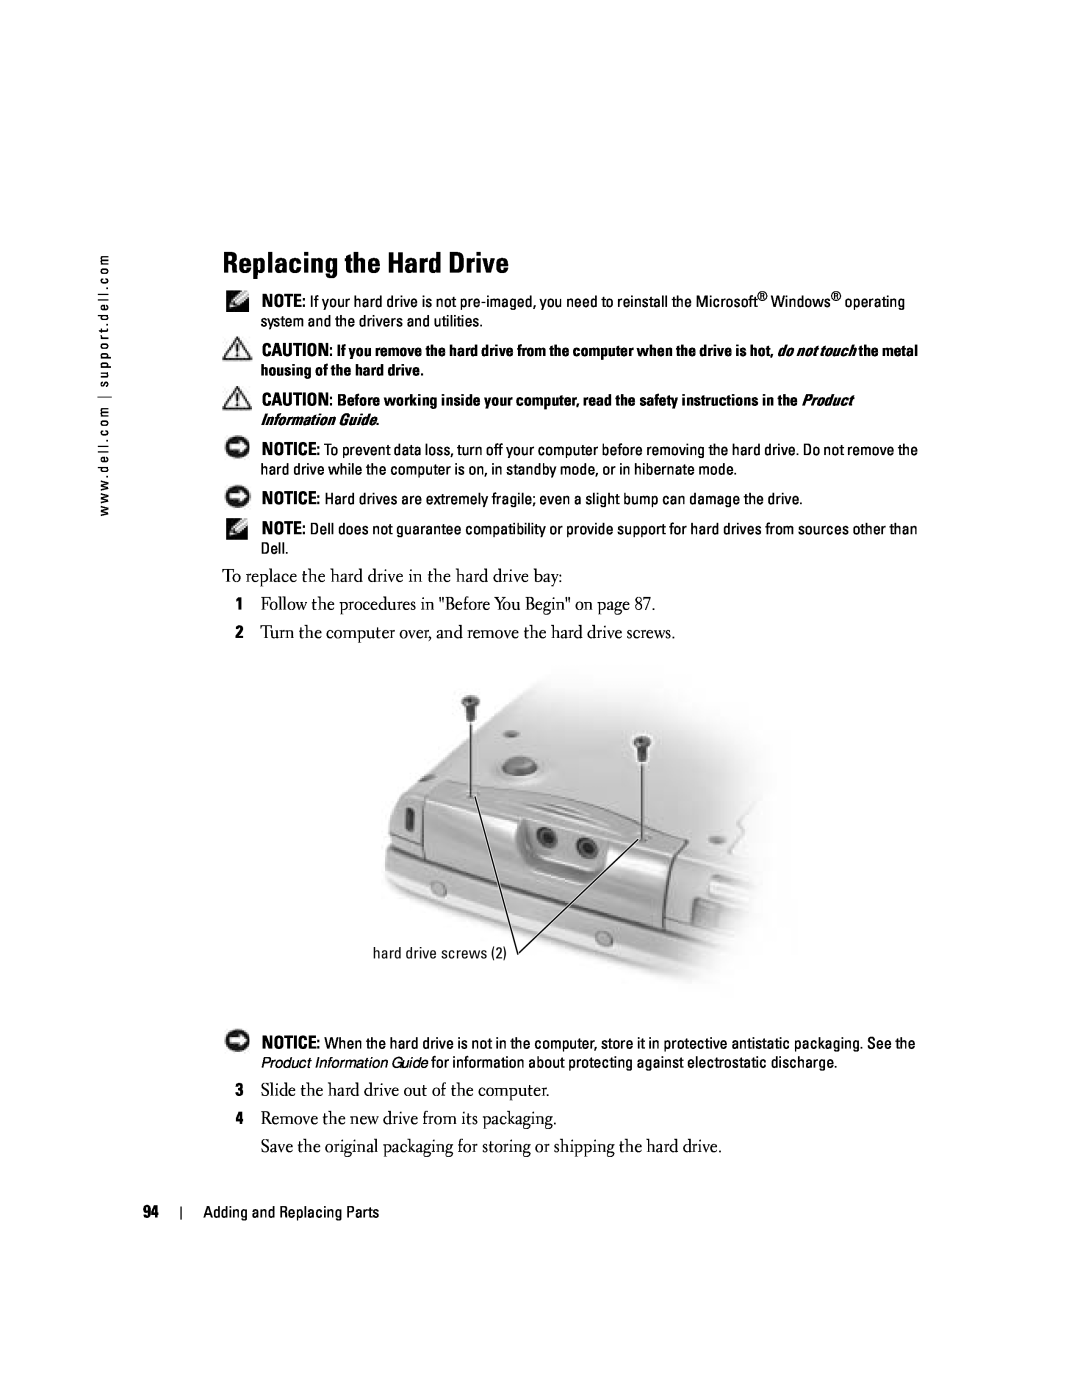 Dell PP10L owner manual Replacing the Hard Drive, To replace the hard drive in the hard drive bay 